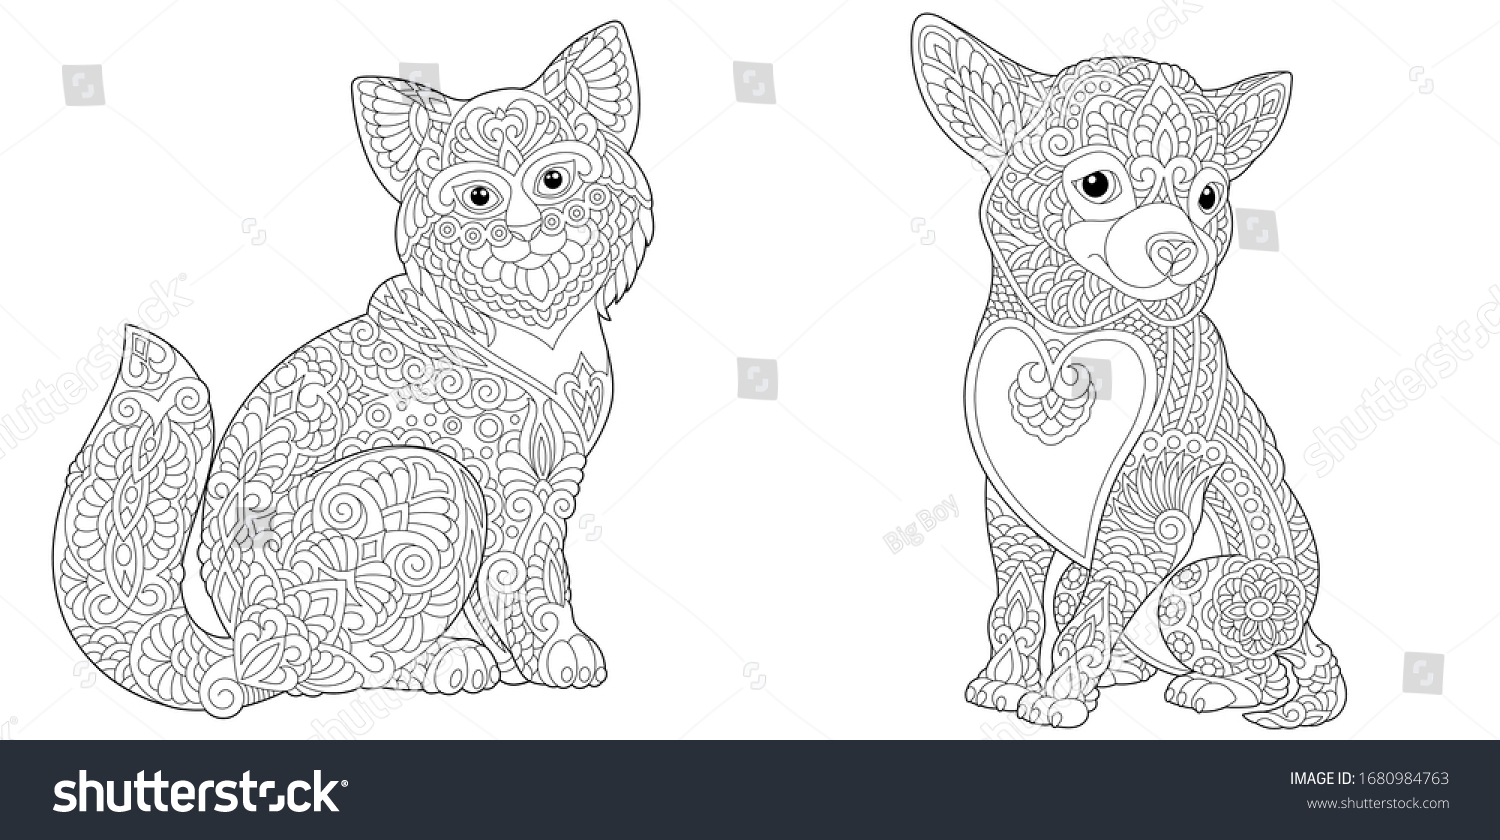 Adult Coloring Book Cat Chihuahua Dog Stock Vector Royalty Free ...